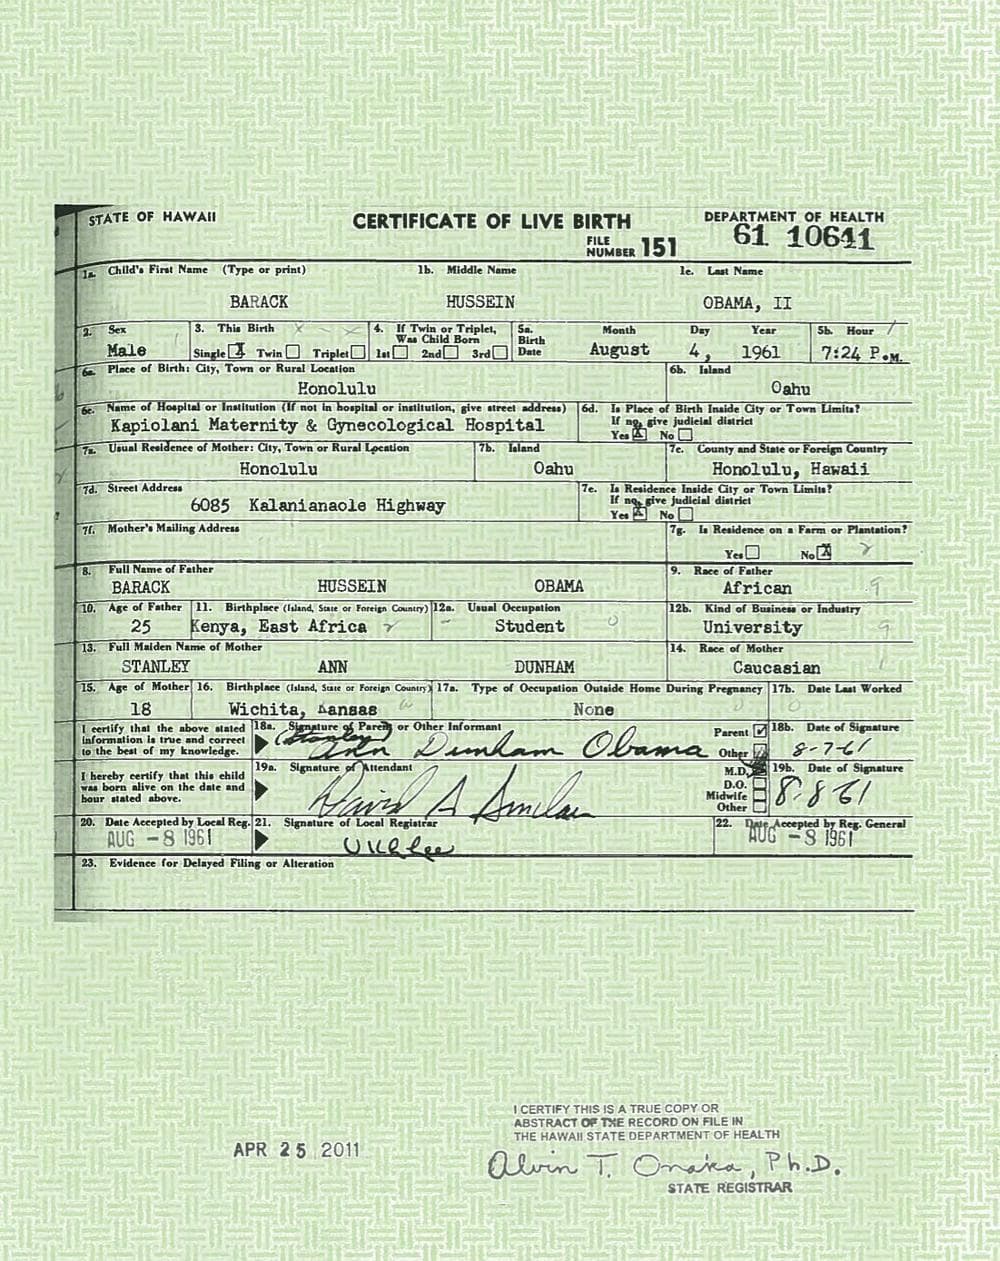 This image provided by the White House shows a copy of the long form of President Barack Obama's birth certificate from Hawaii. (AP)